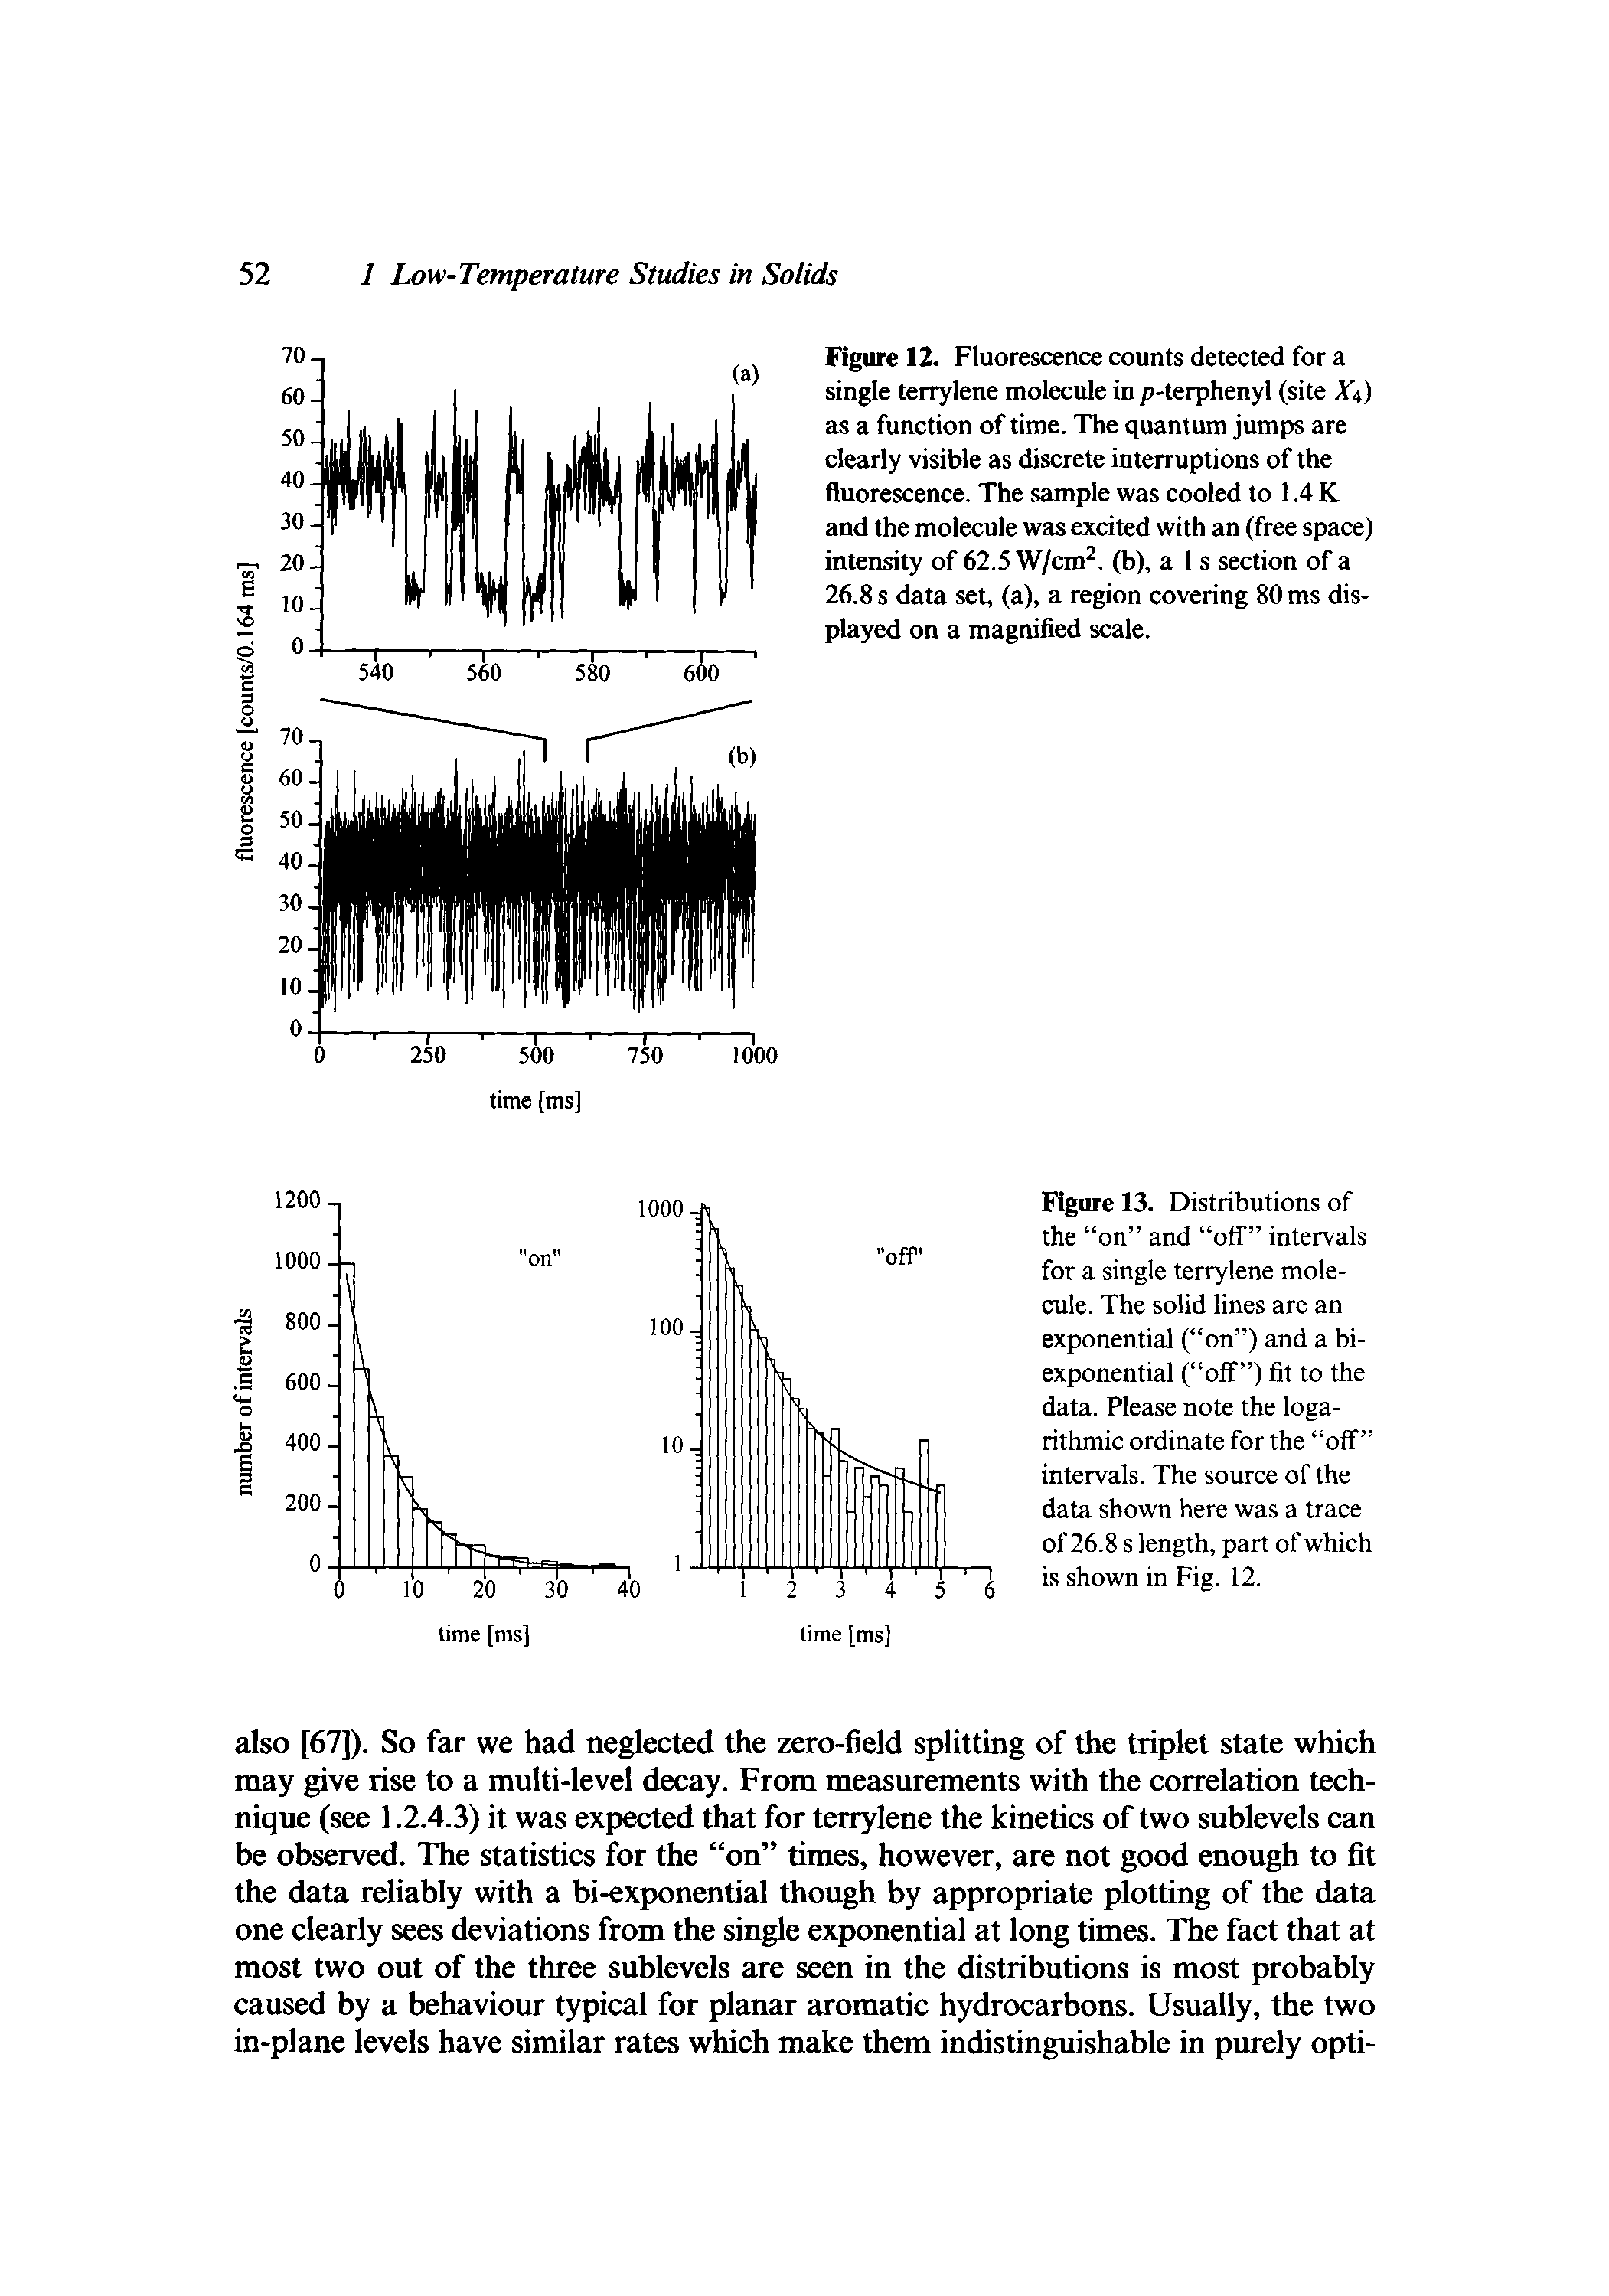 Figure 12. Fluorescence counts detected for a single terrylene molecule in p-terphenyl (site Xi) as a function of time. The quantum jumps are clearly visible as discrete intenuptions of the fluorescence. The sample was cooled to 1.4 K and the molecule was excited with an (free space) intensity of 62.5 W/cm. (b), a I s section of a 26.8 s data set, (a), a region covering 80 ms displayed on a magnified scale.